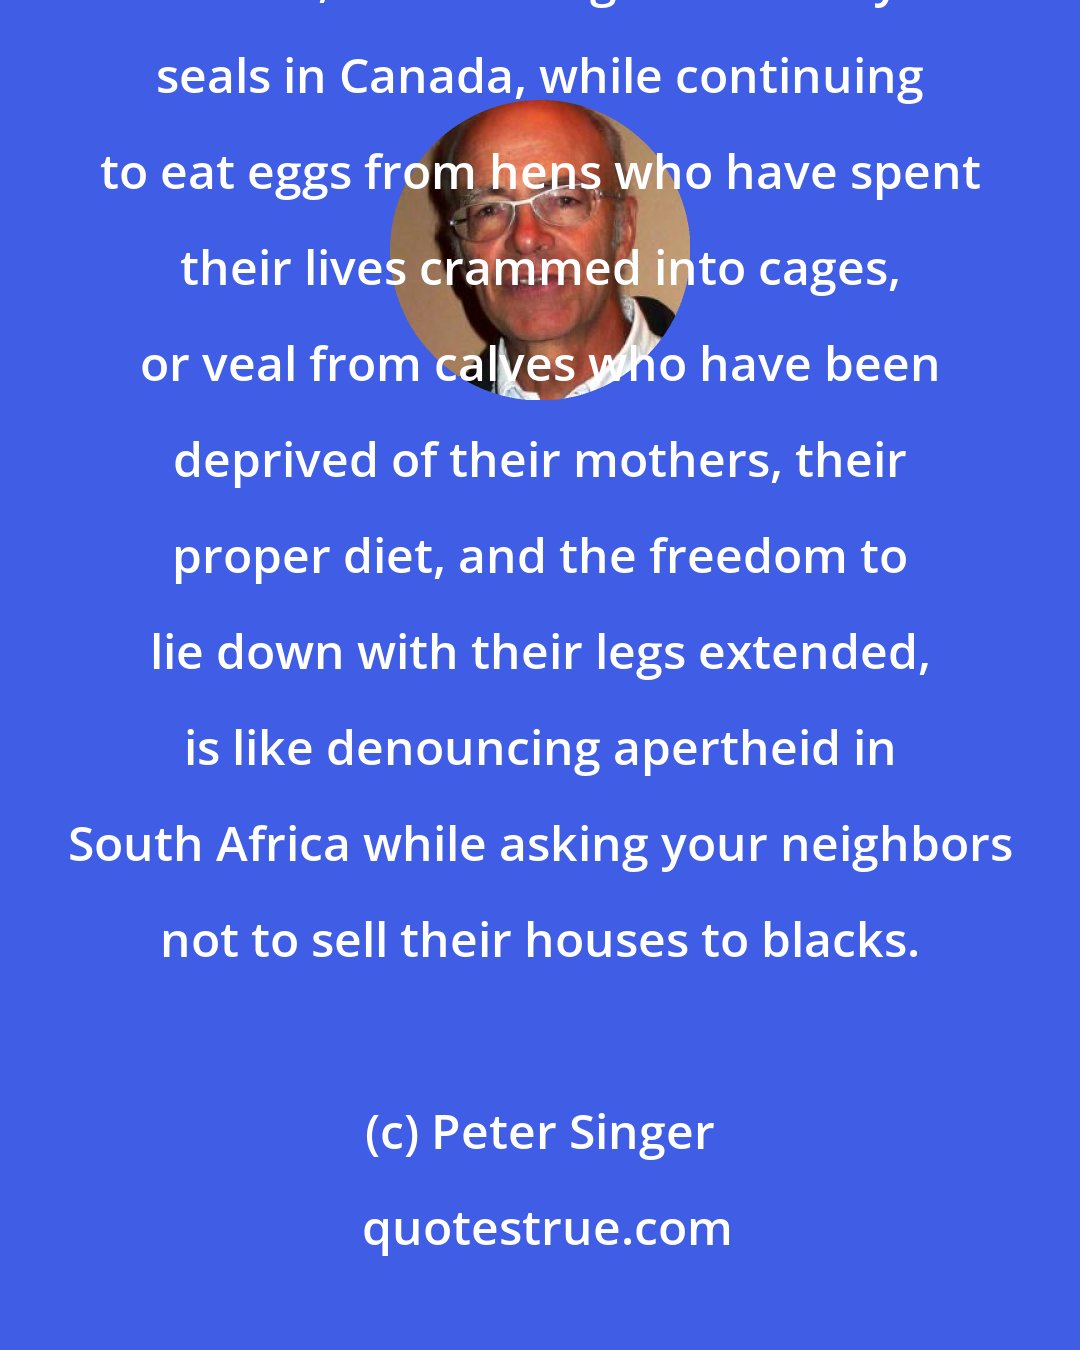 Peter Singer: To protest about bullfighting in Spain, the eating of dogs in South Korea, or the slaughter of baby seals in Canada, while continuing to eat eggs from hens who have spent their lives crammed into cages, or veal from calves who have been deprived of their mothers, their proper diet, and the freedom to lie down with their legs extended, is like denouncing apertheid in South Africa while asking your neighbors not to sell their houses to blacks.